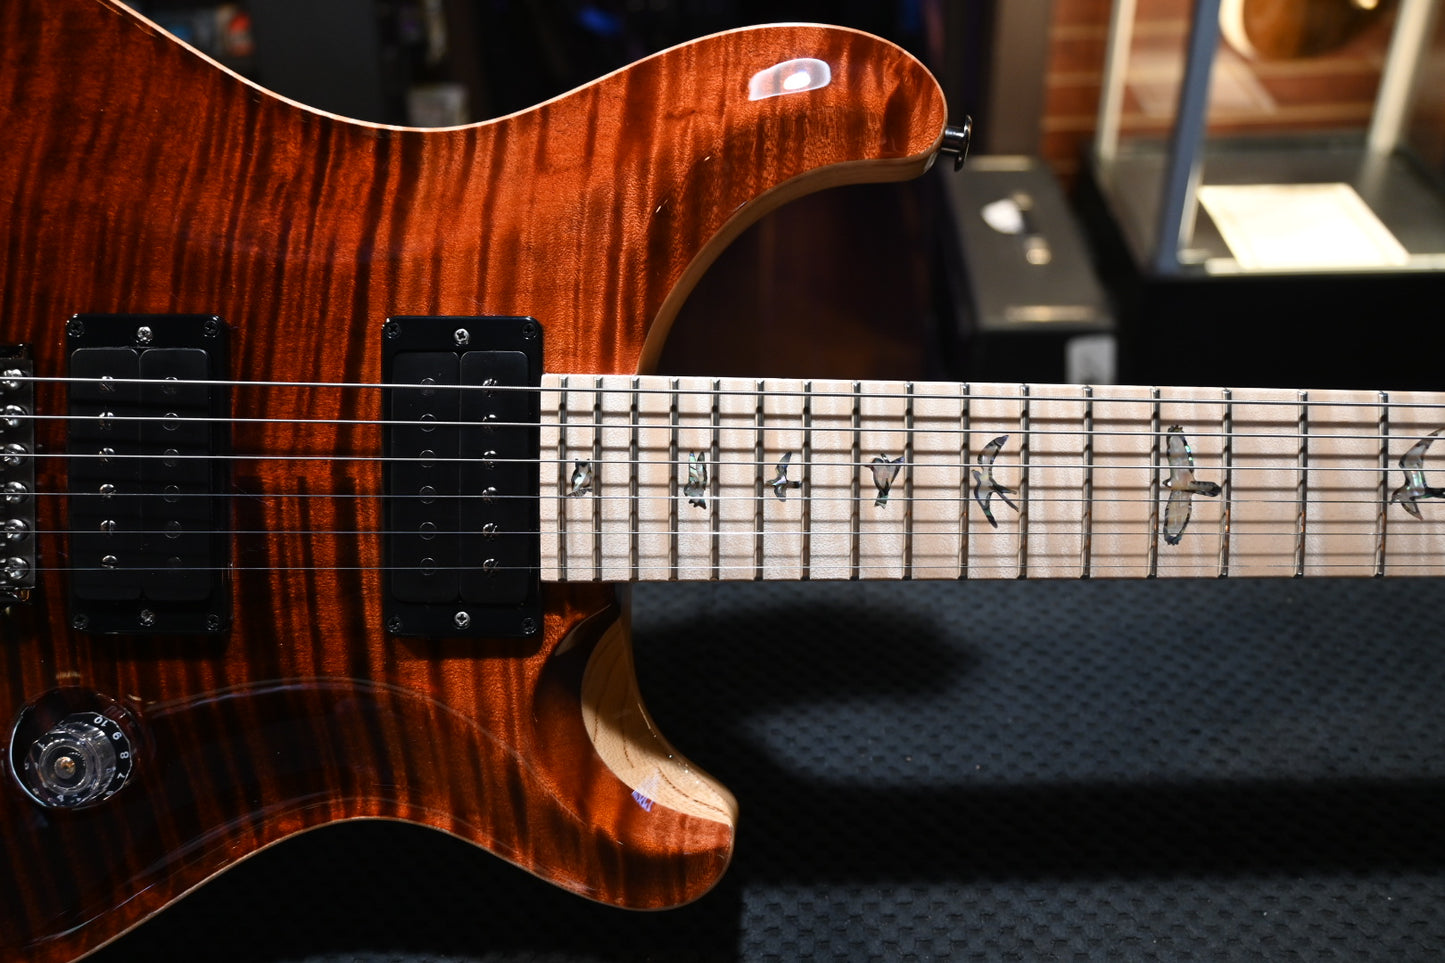 PRS Wood Library Custom 24 10-Top Swamp Ash Figured Maple Neck - Fire Red to Grey Black Fade Guitar #0662 - Danville Music